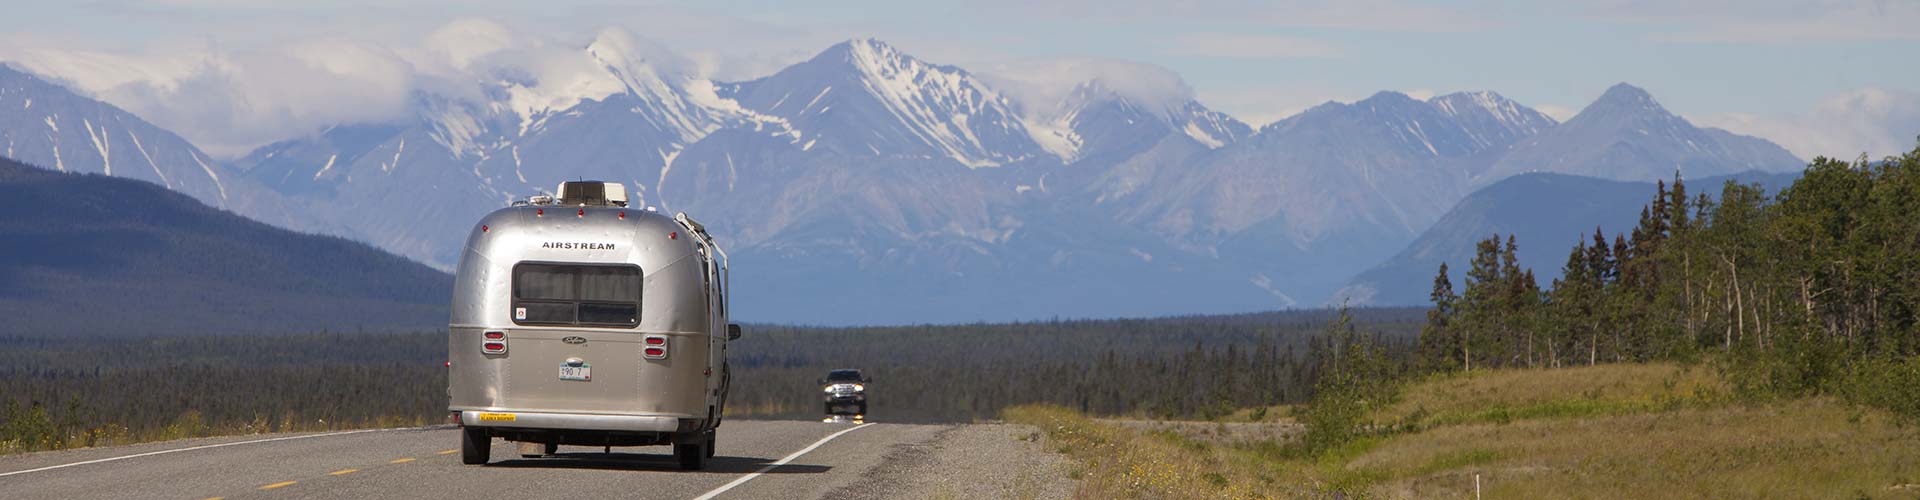 Alaska Highway with scenic Mountain Vista in backdrop